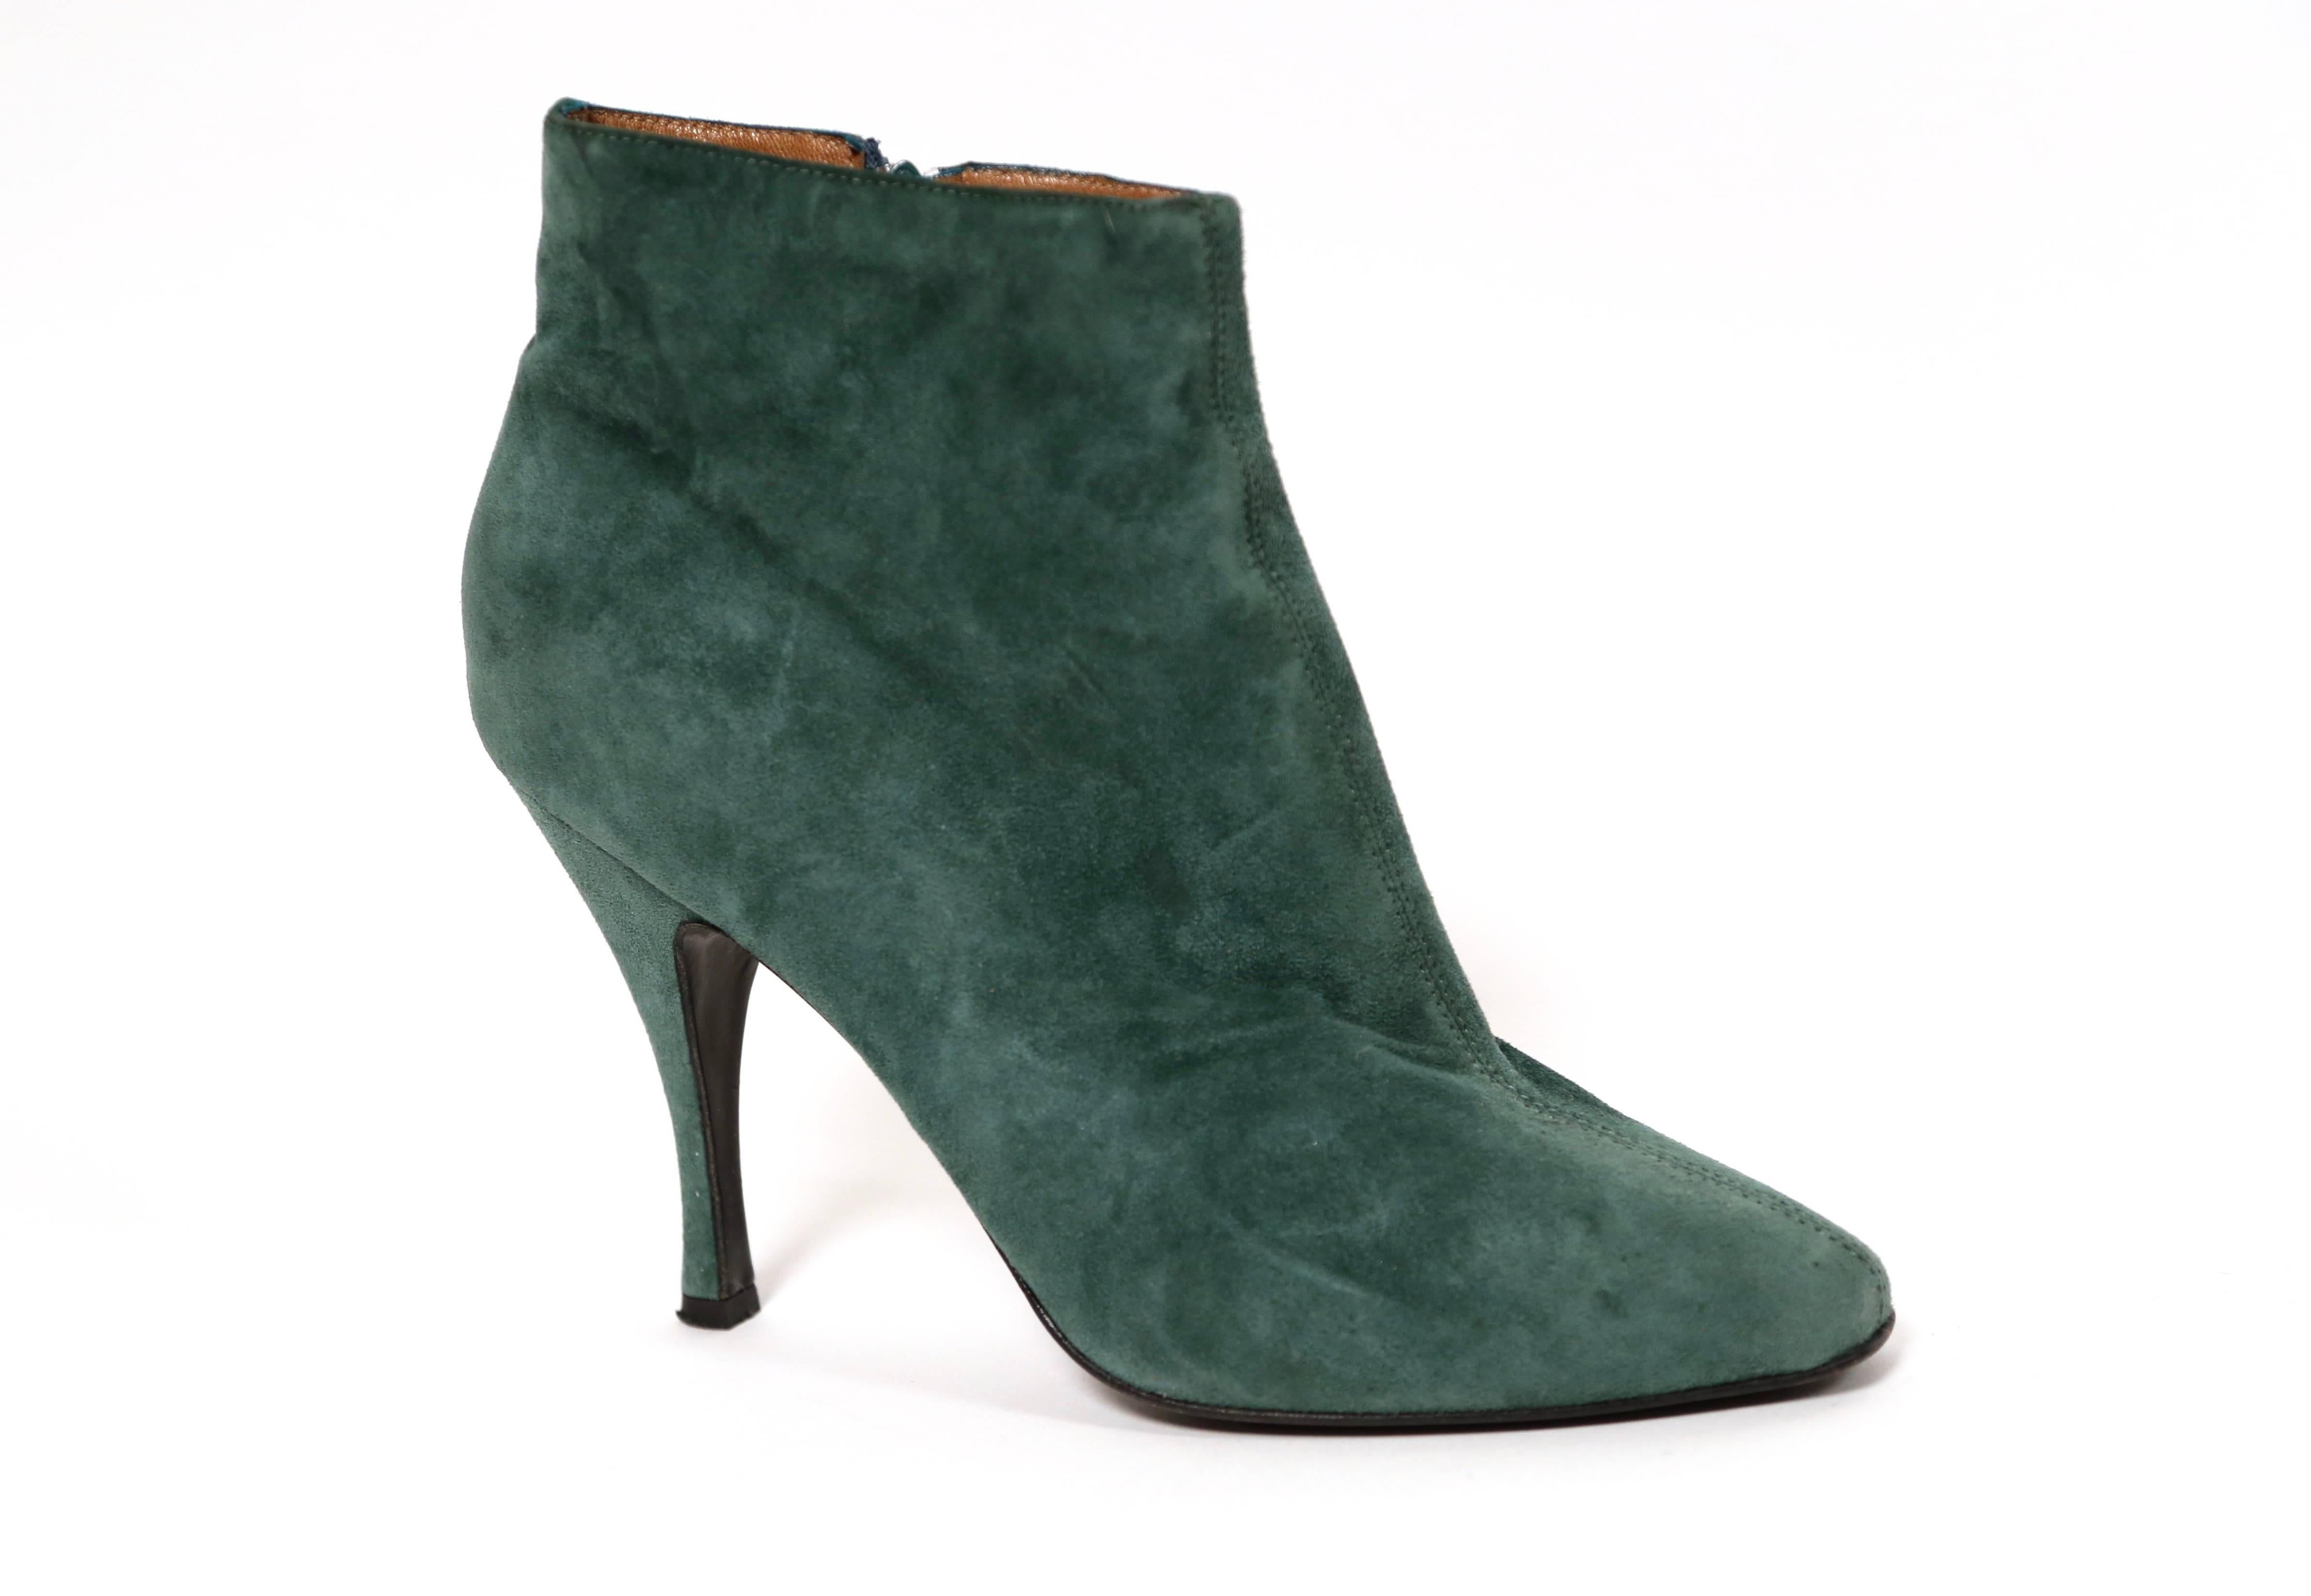 Emerald green suede stiletto ankle boots with almond shaped toe from Azzedine Alaia dating to the 1990's. Size 40 (US 9-9.5). Inside zips. Composed entirely of leather. Made in France. Good condition. Also available in black.